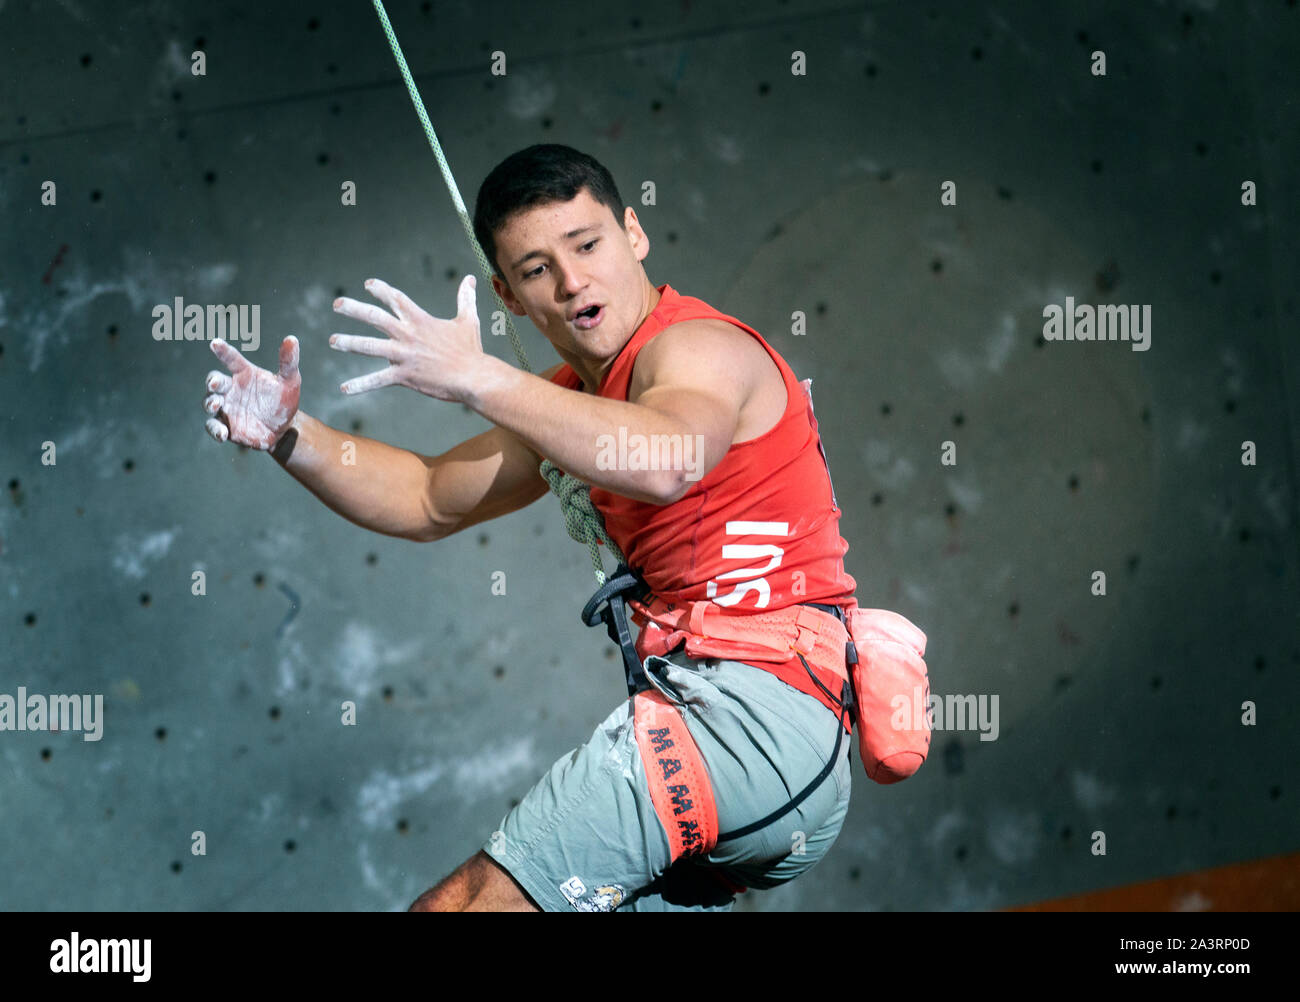 Alberto Gines Lopez of Spain competes in the Lead climbing Mens Final on at the IFSC Climbing World Championships at the Edinburgh International Climb Stock Photo